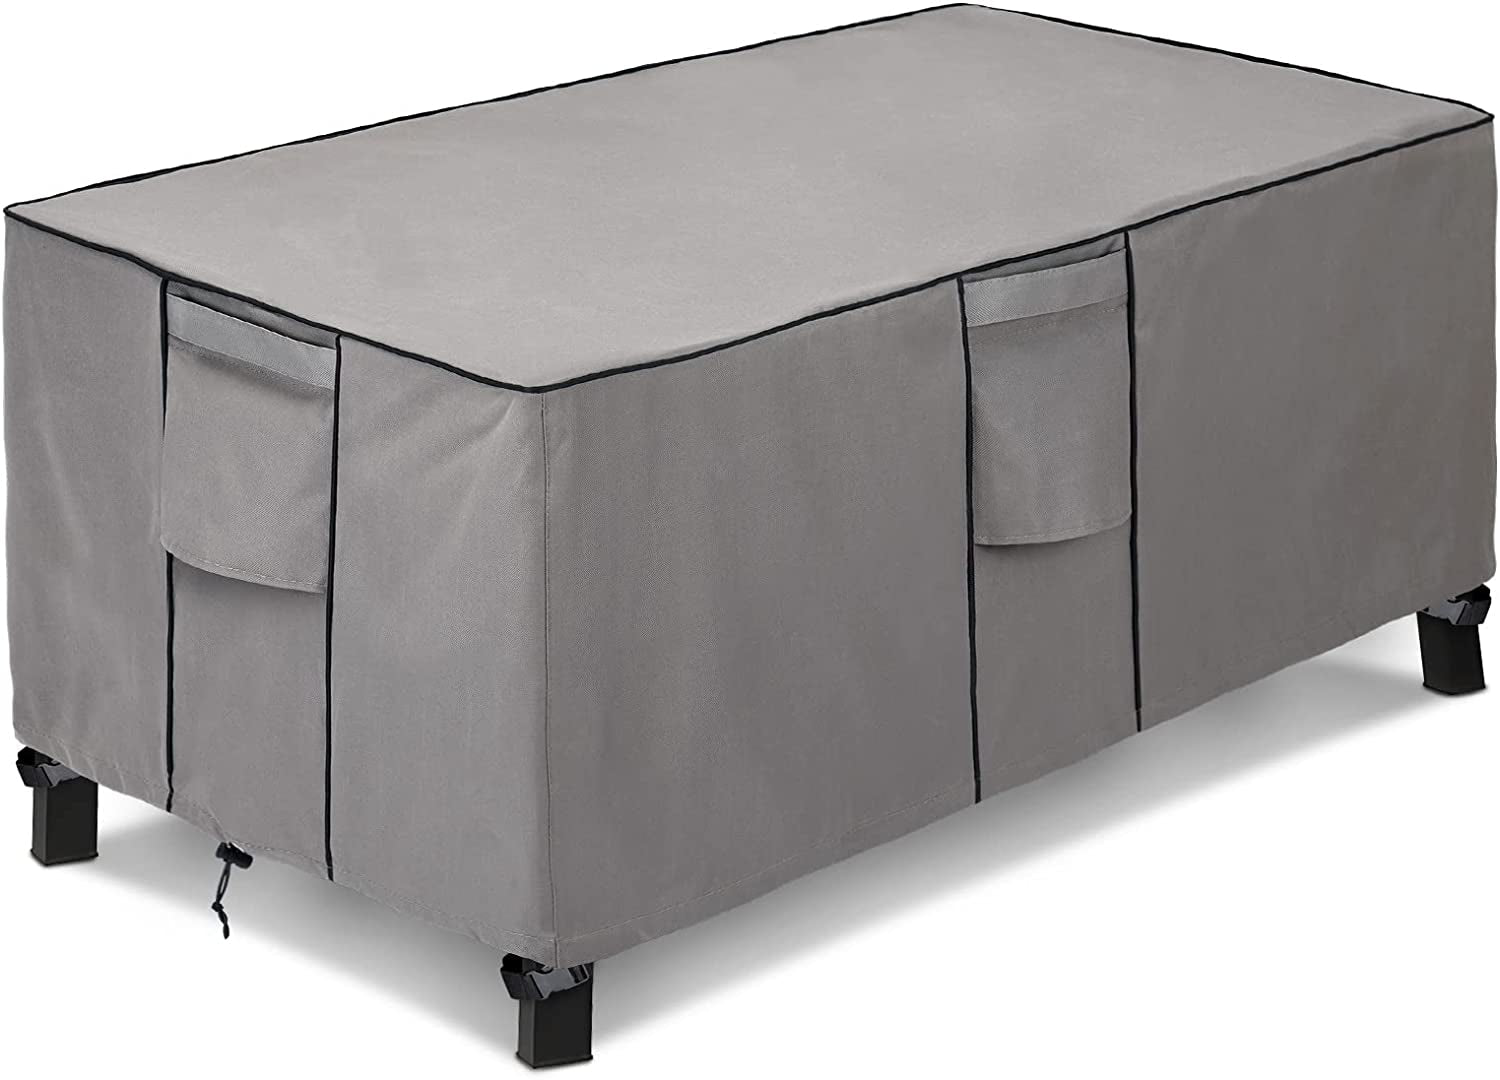 KylinLucky, Kylinlucky Patio Coffee Table Cover, Waterproof Rectangular Outdoor Small Side Table Cover Fits up to 48L X 28W X 13H Inches